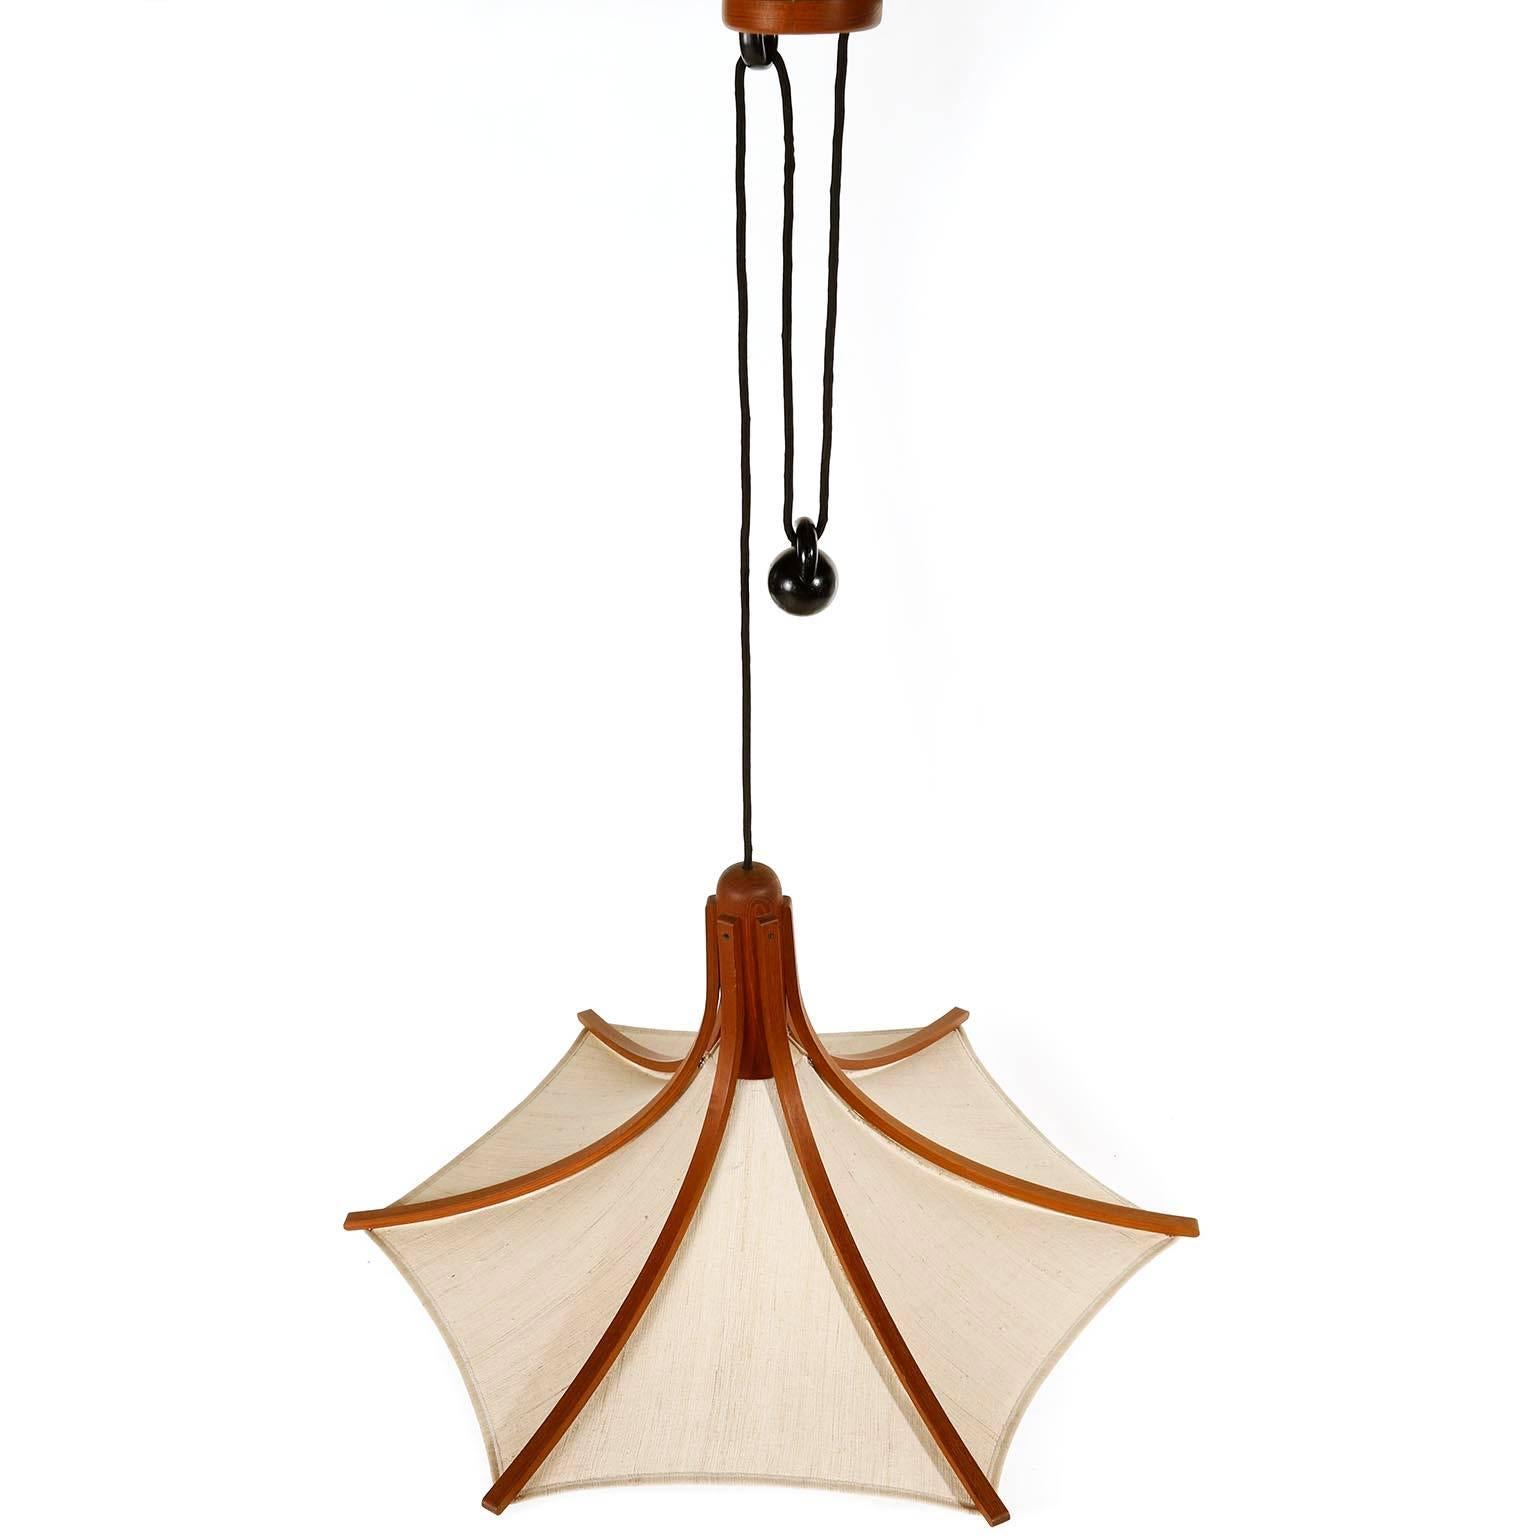 A large height adjustable counter balance pendant light manufactured in Denmark in midcentury, circa 1960 (late 1950s or early 1960s).
This Danish modern design lamp is made of a teak frame which is covered with linen. The drop can be adjusted with